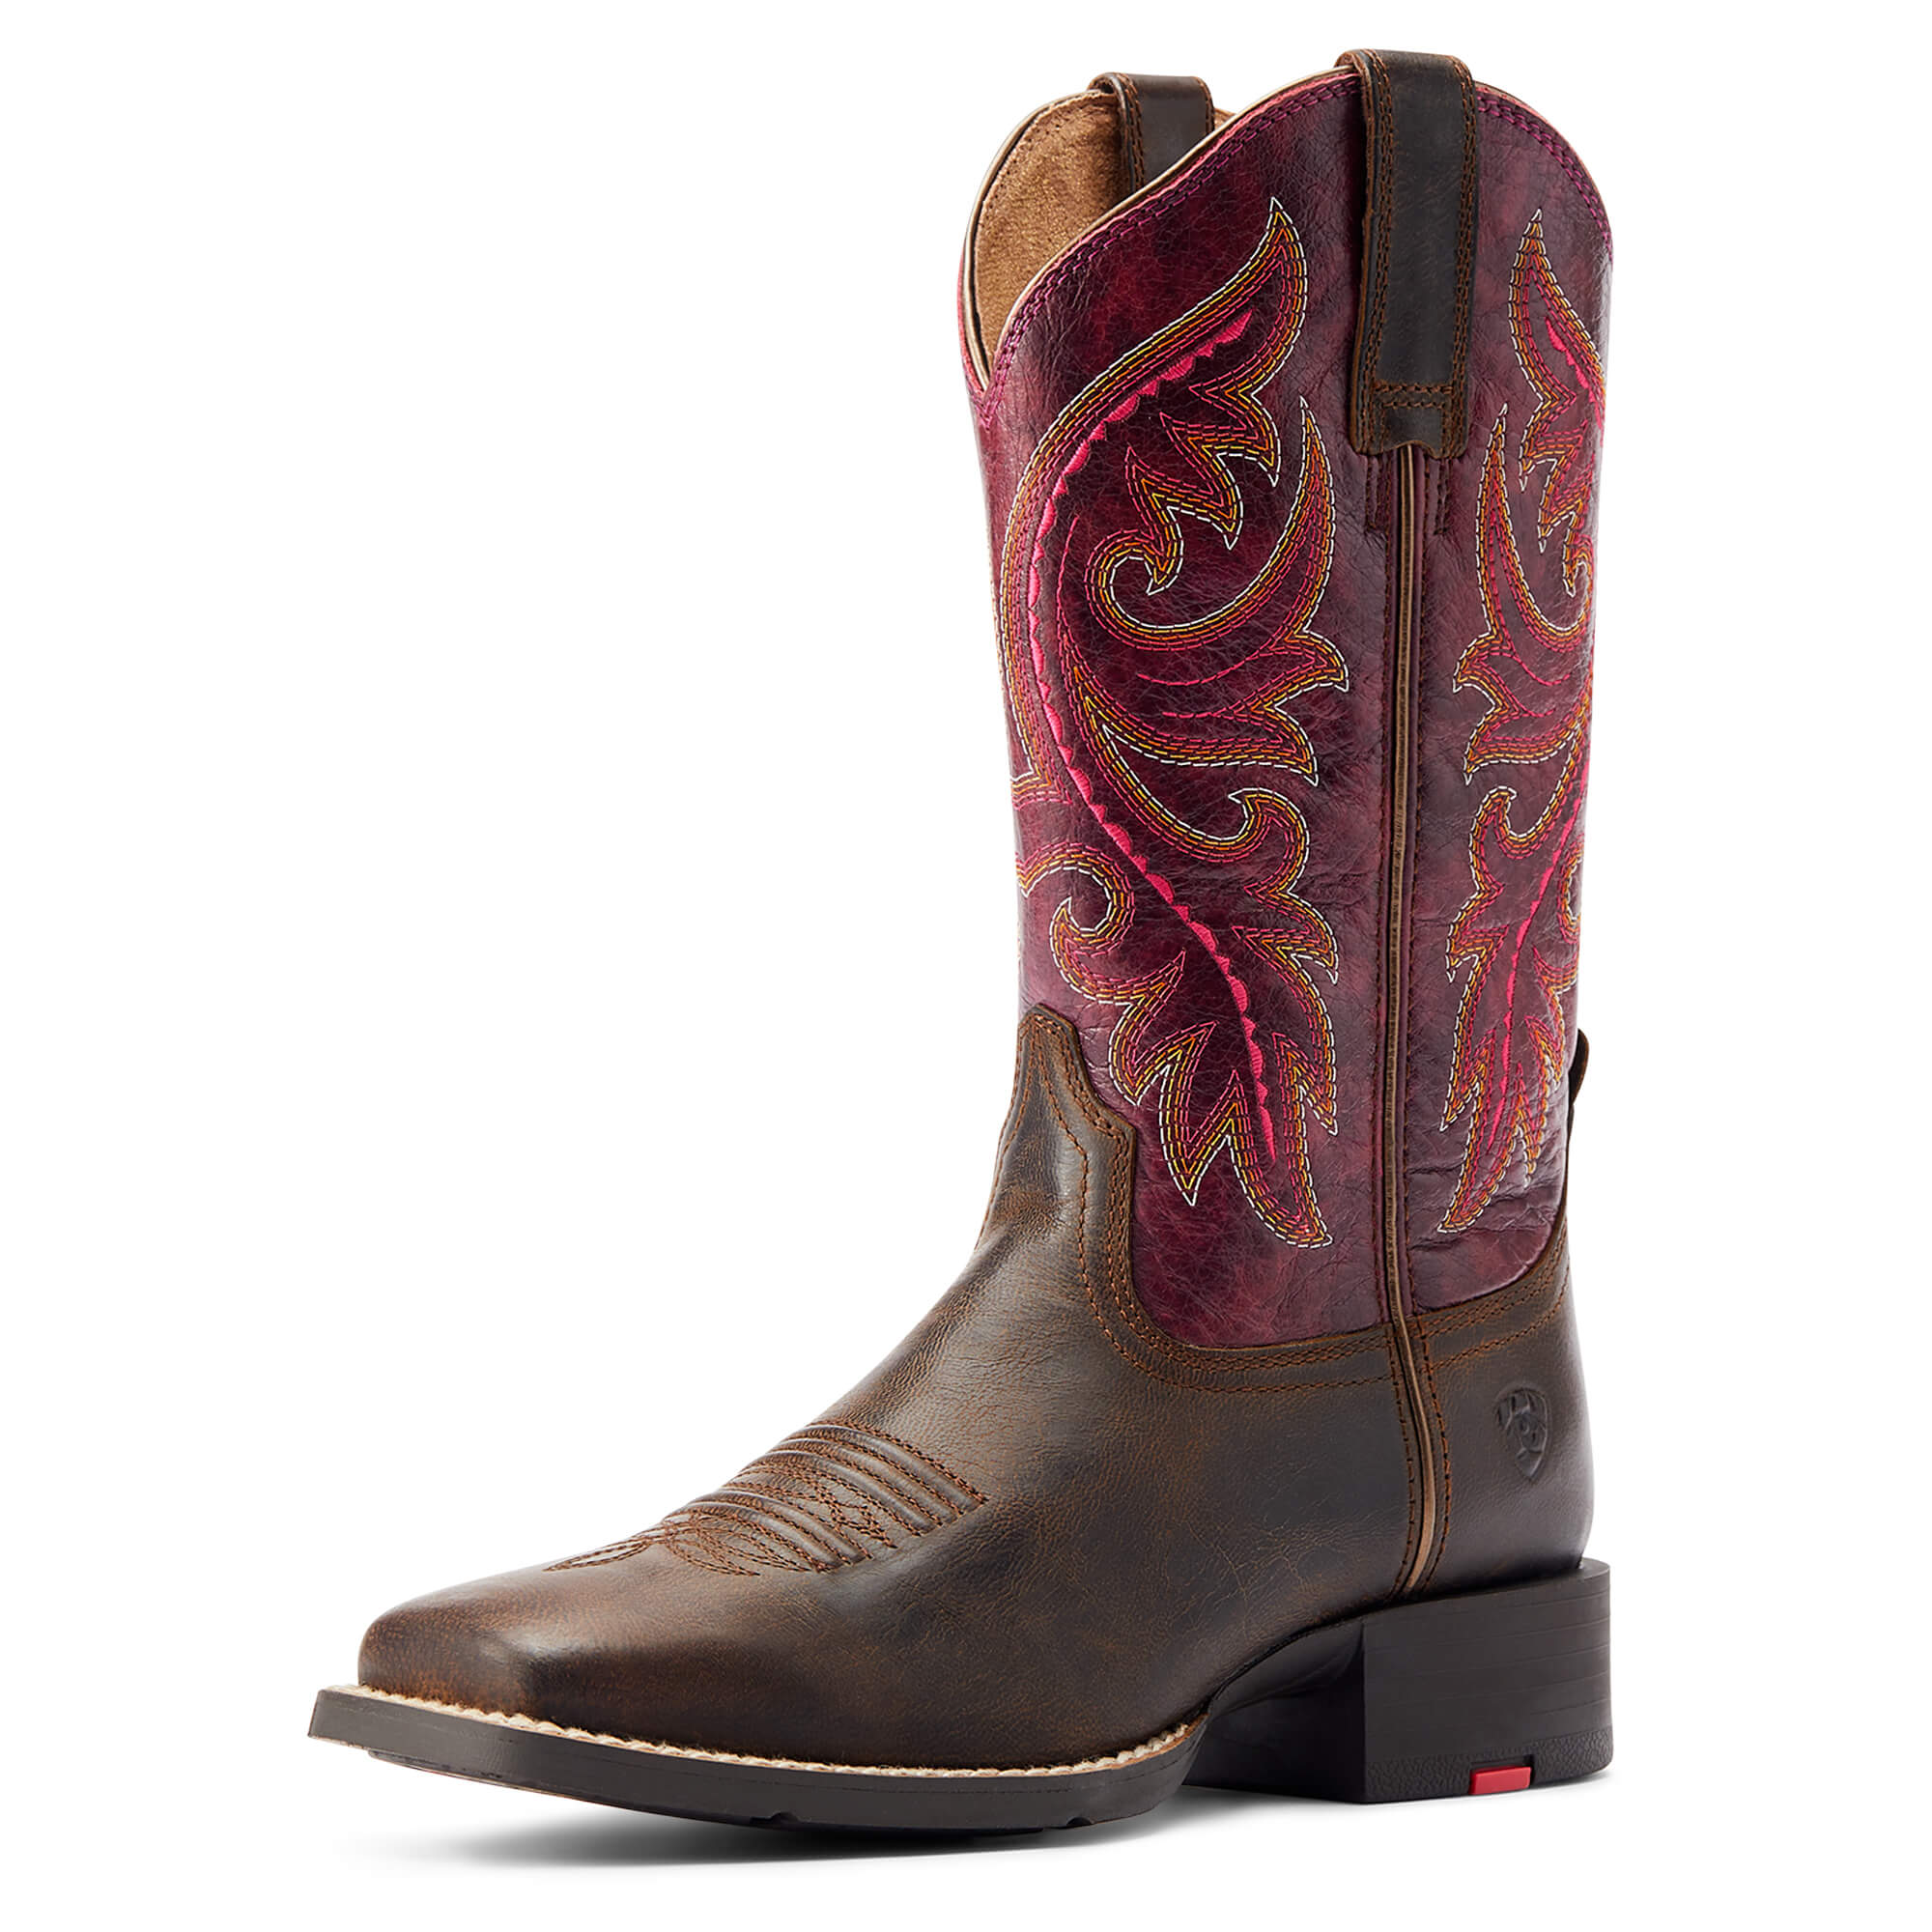 Ariat_Round_Up_Back_Zip_Western_Boot_10044433_3-4_front